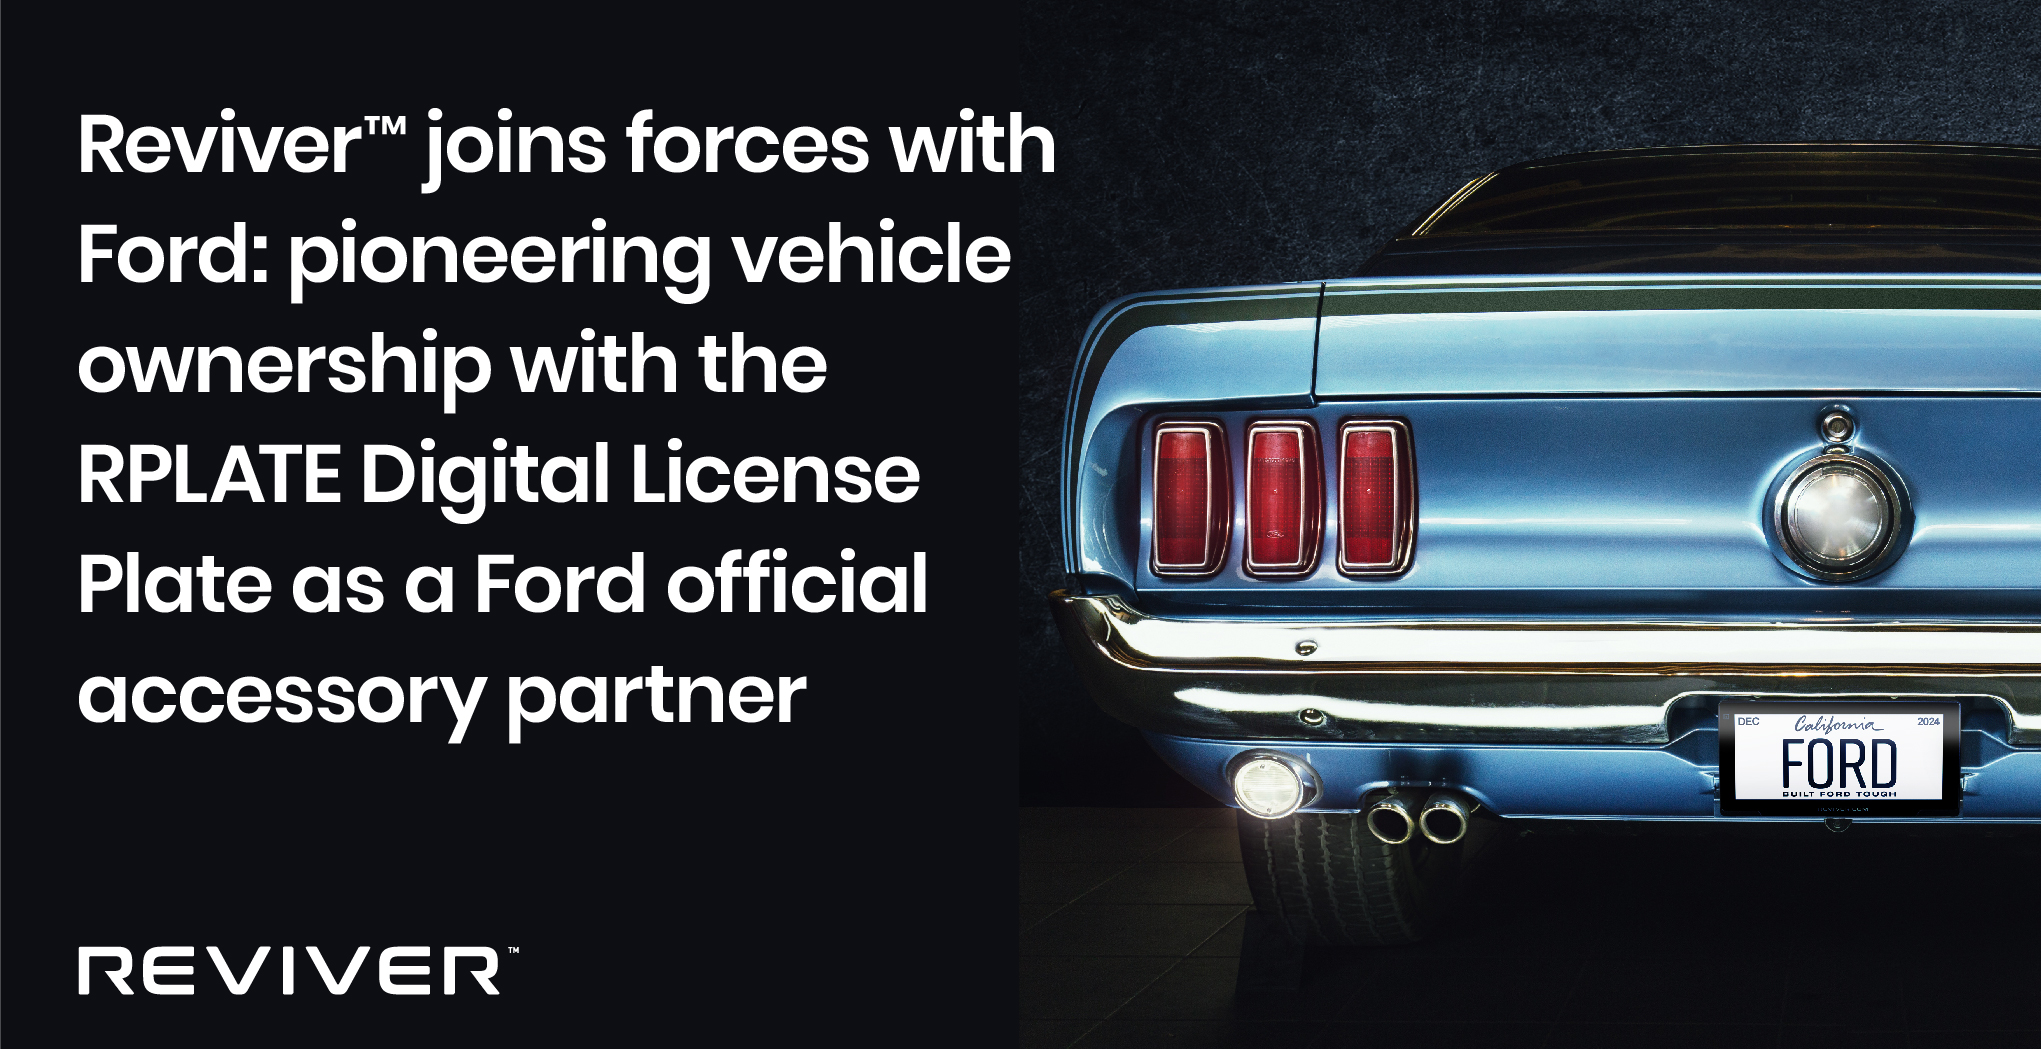 ReviverTM Joins Forces with Ford: Pioneering Vehicle Ownership with the RPlate Digital License Plate as a Ford Official Accessory Partner